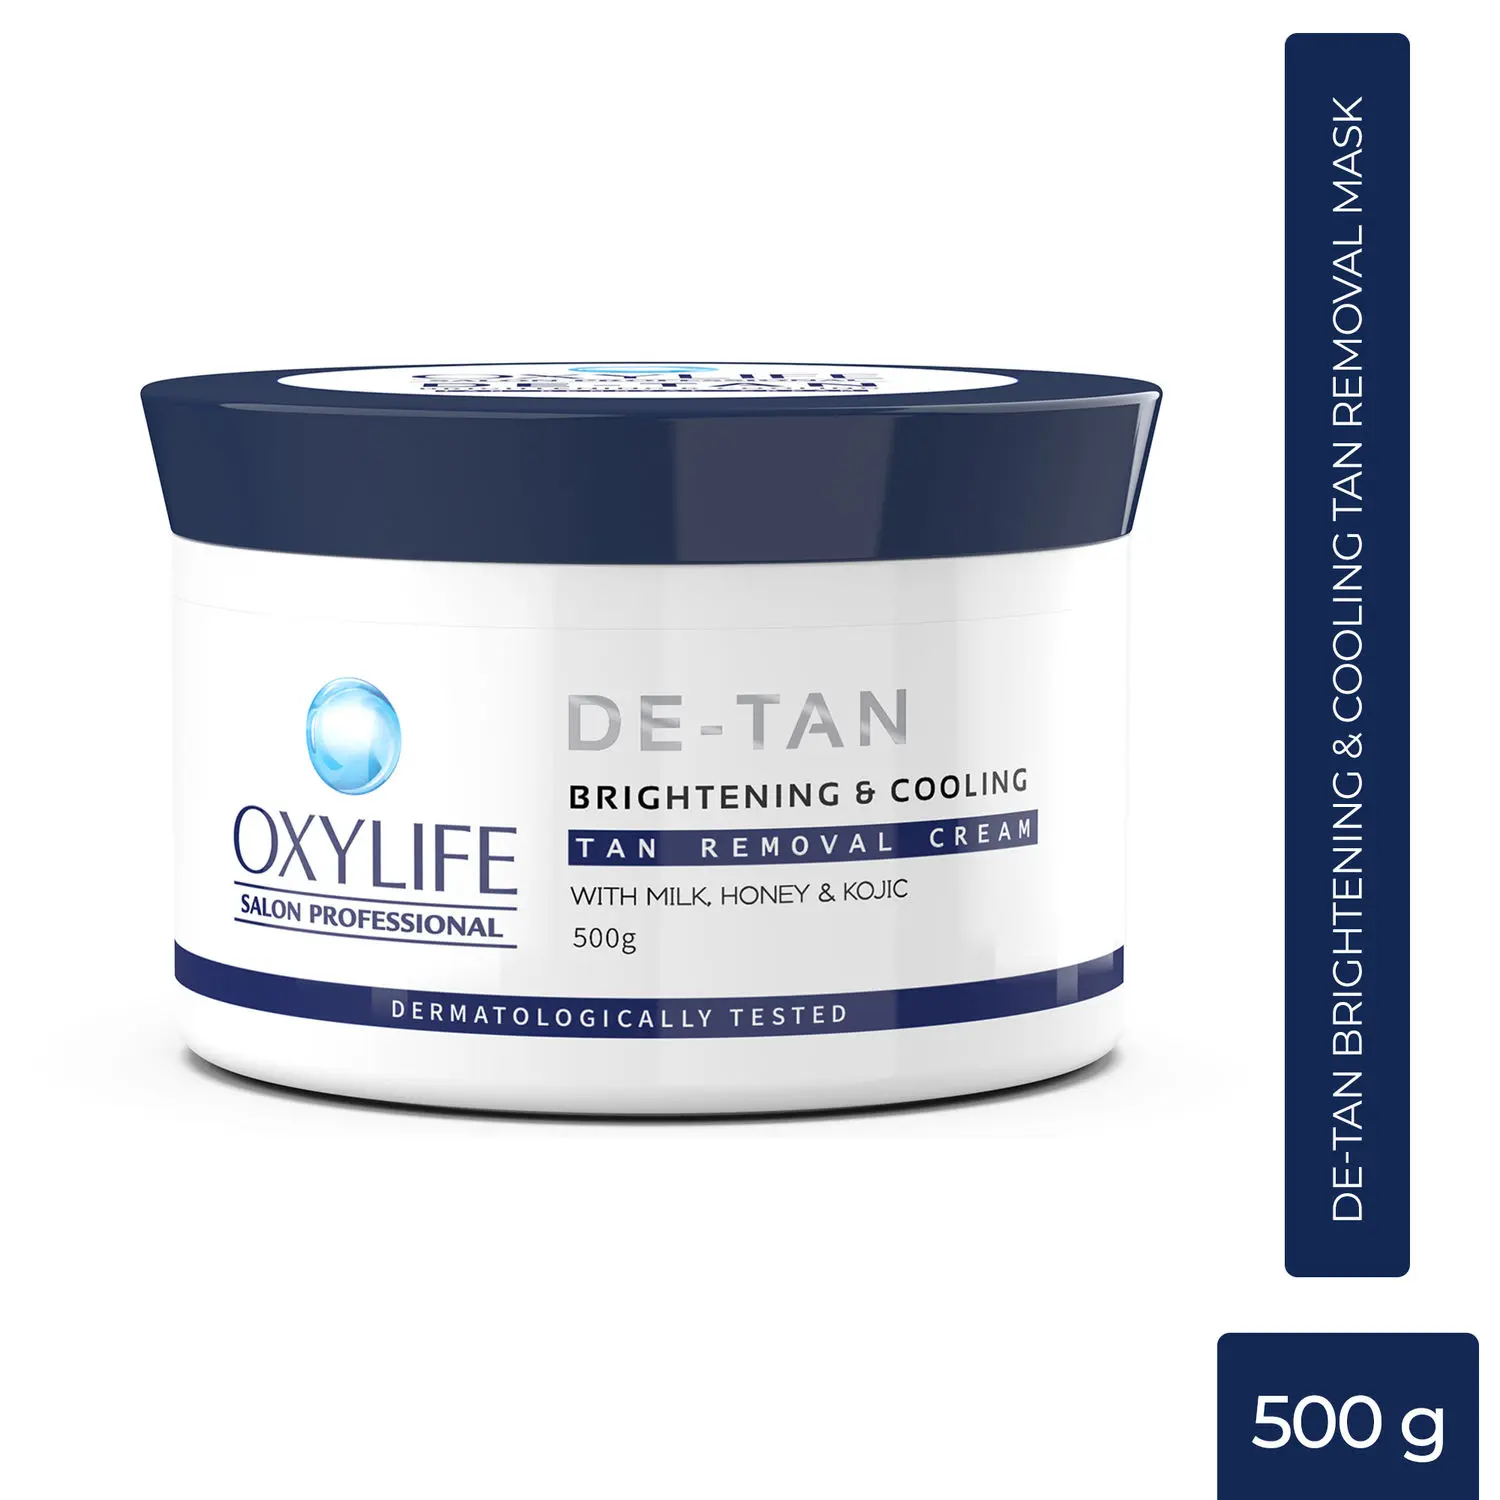 Oxylife Salon Professional Detan Brightening & Cooling Tan Removal Cream - 500g | With Milk, Honey & Kojik | Dermatologically Tested | Instant & Long Lasting Glow/Fairness | For All Skin Types